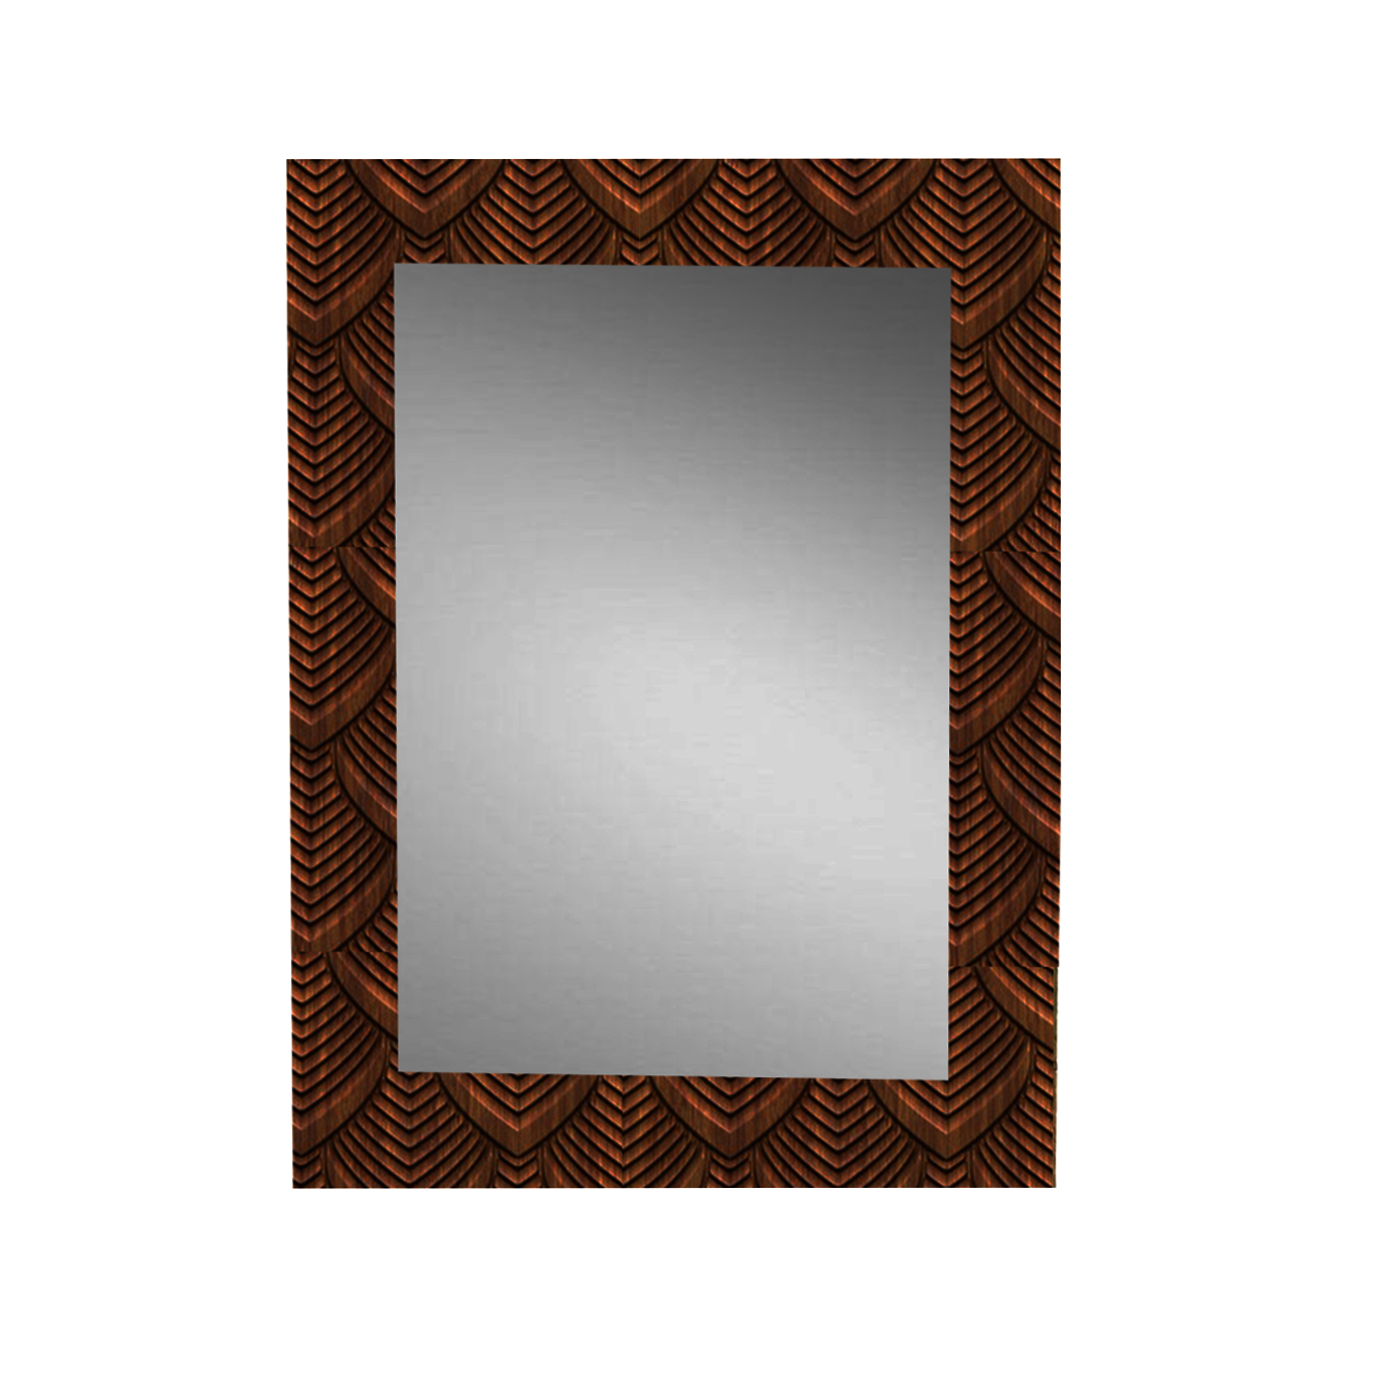 Detec™ HandCrafted Mirror 30 inches